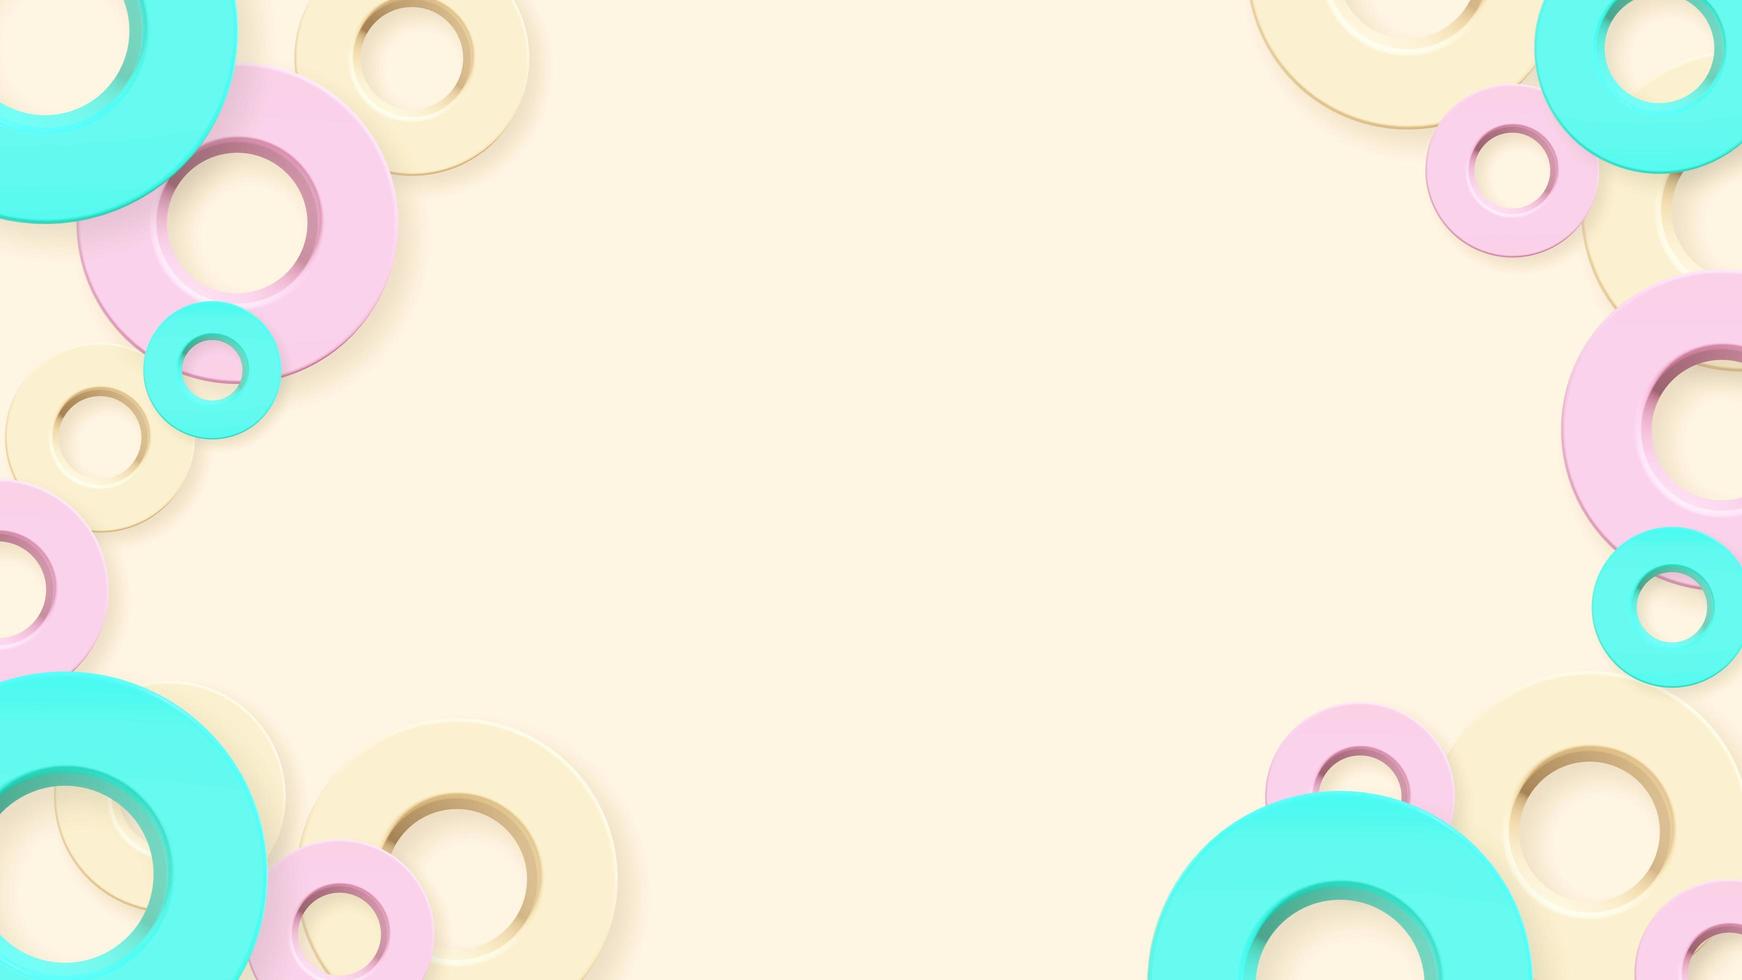 Abstract geometry shape circles pastel colorful background. 3D illustration. Poster or website design photo